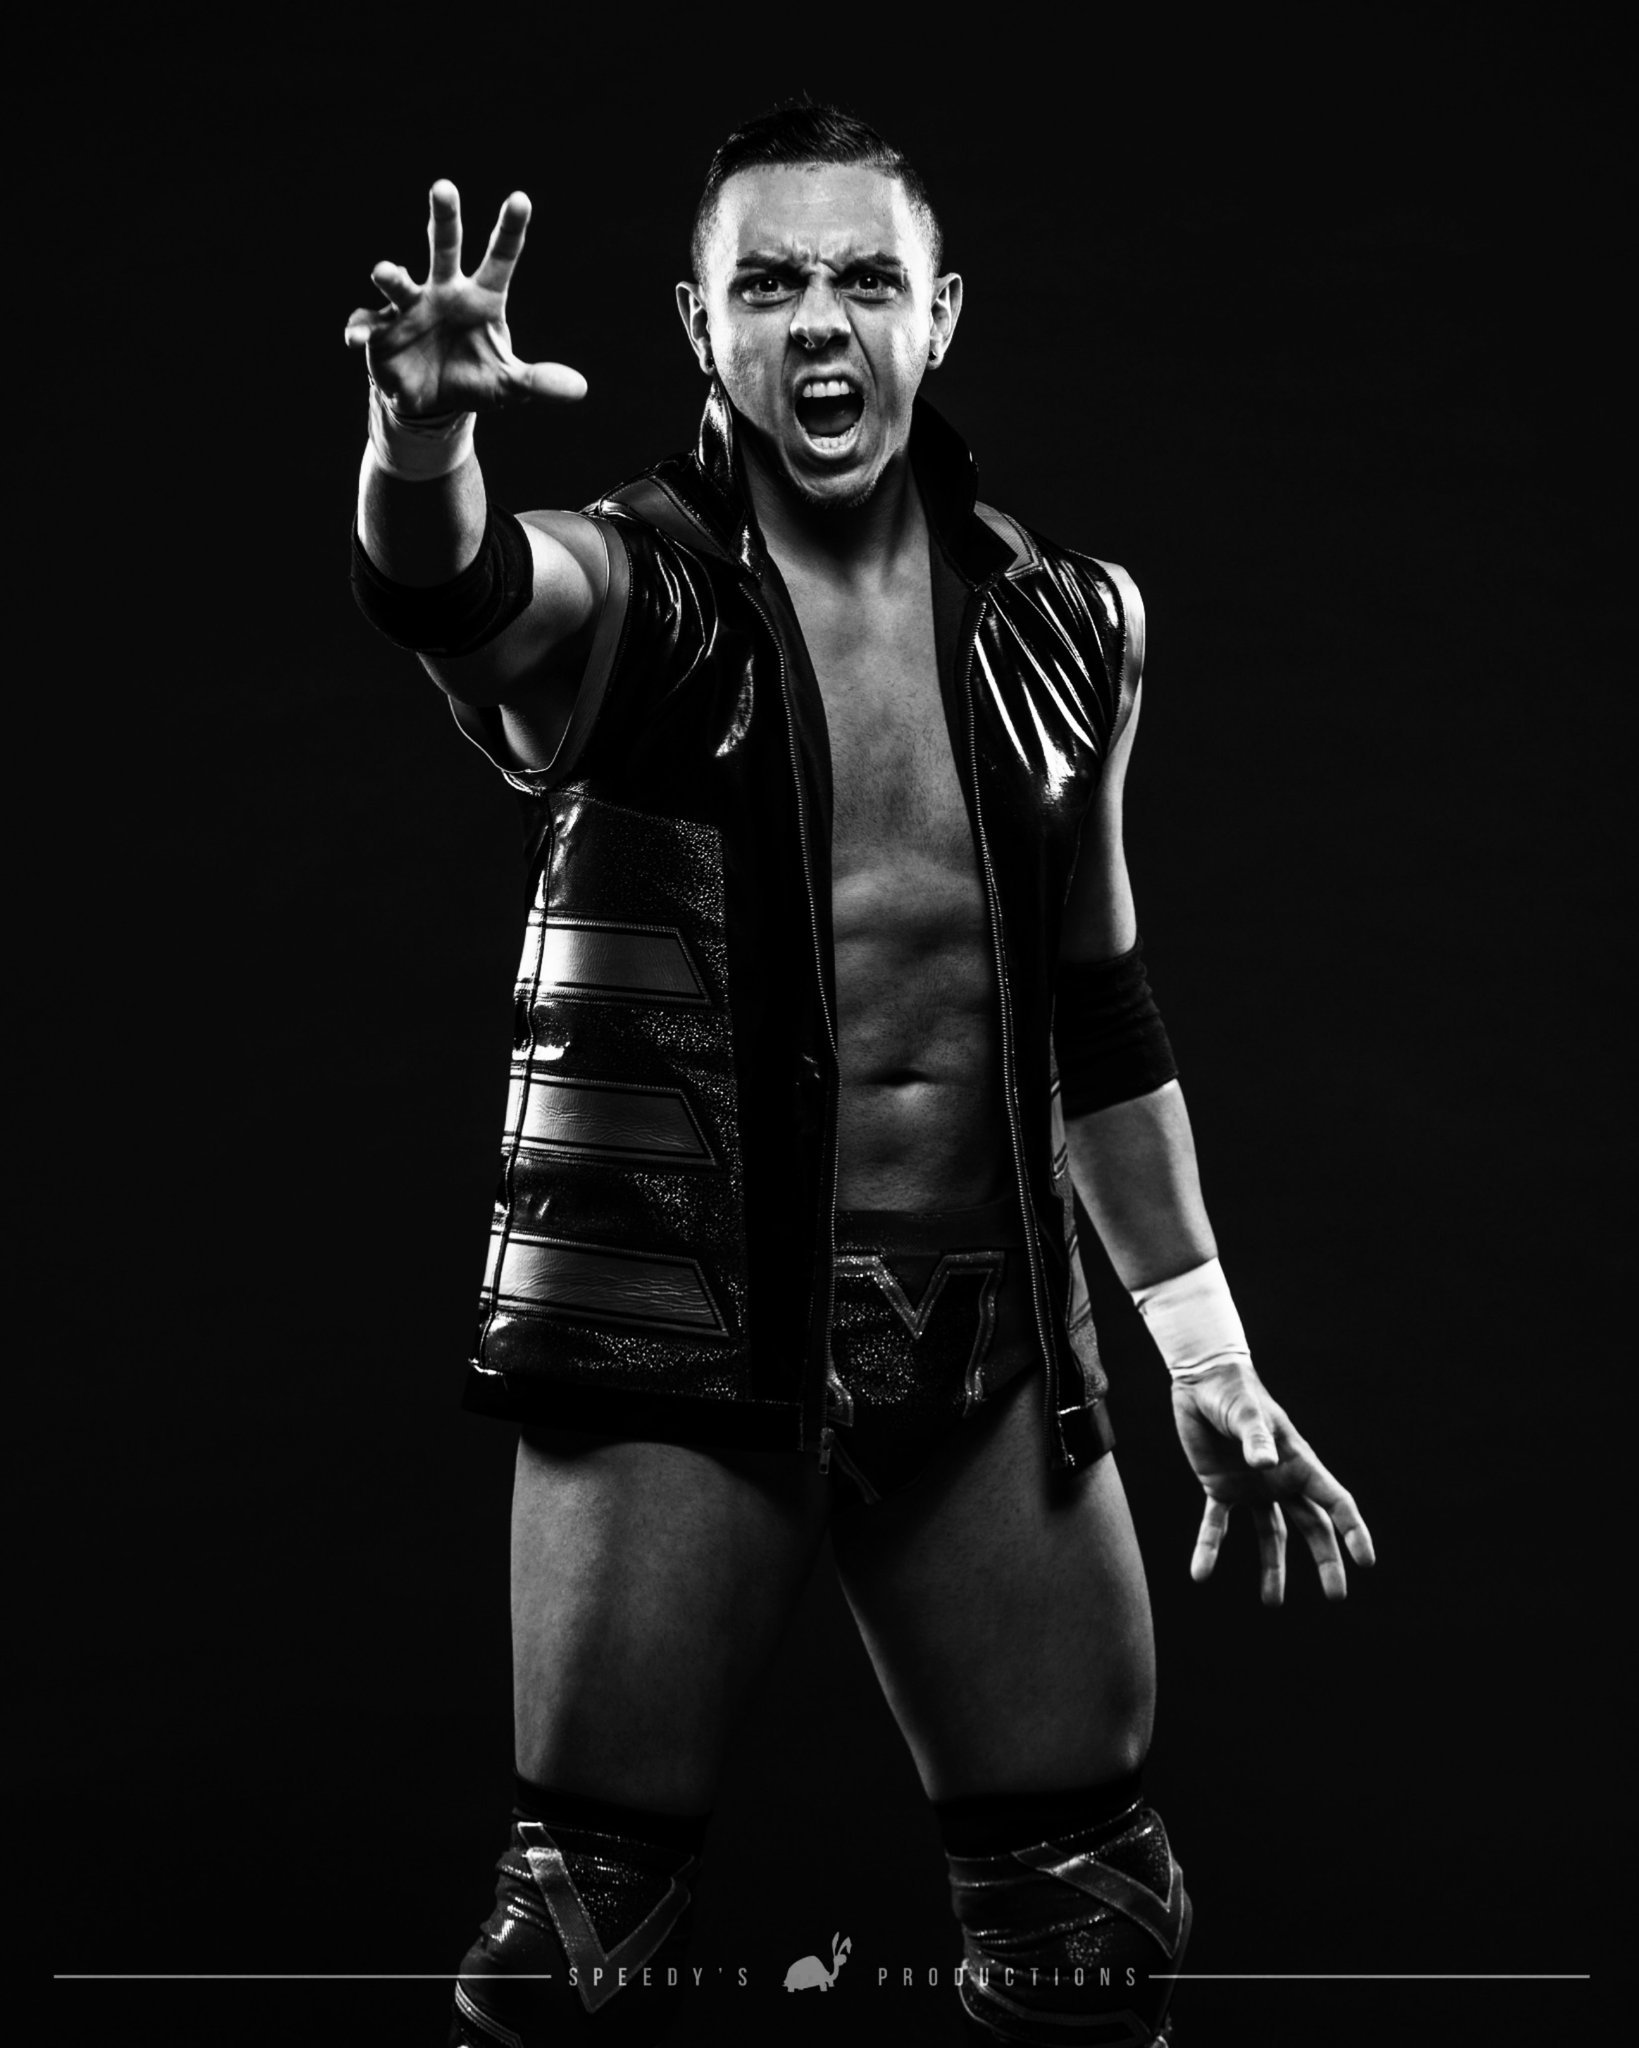 Another Talent Signs With ROH